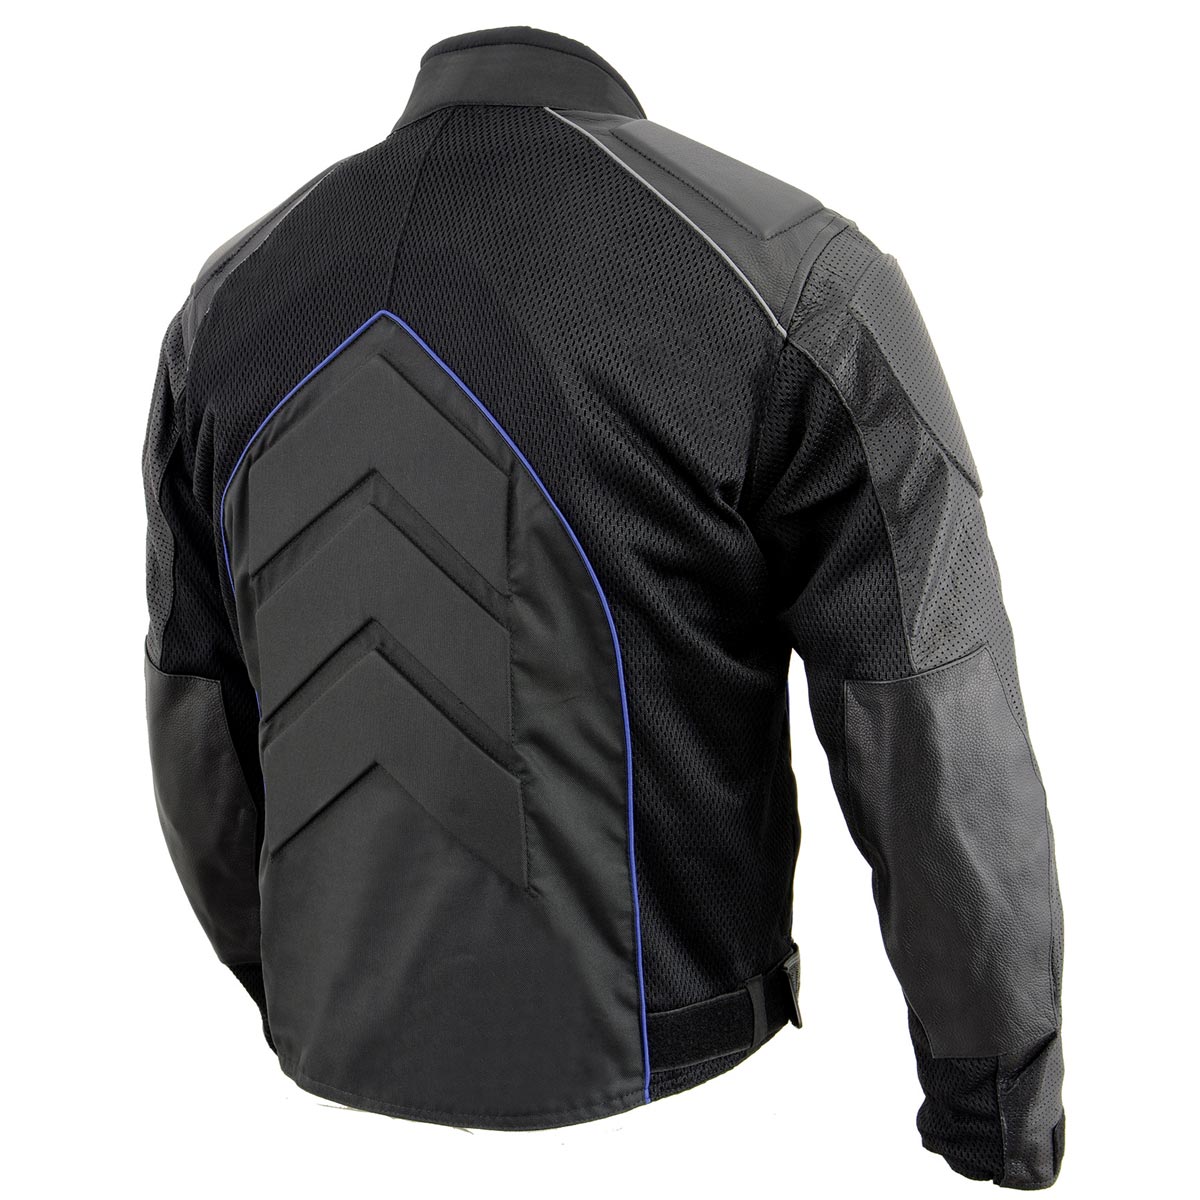 NexGen SH2153 Men's Black and Blue Armored Moto Textile and Leather Combo Jacket